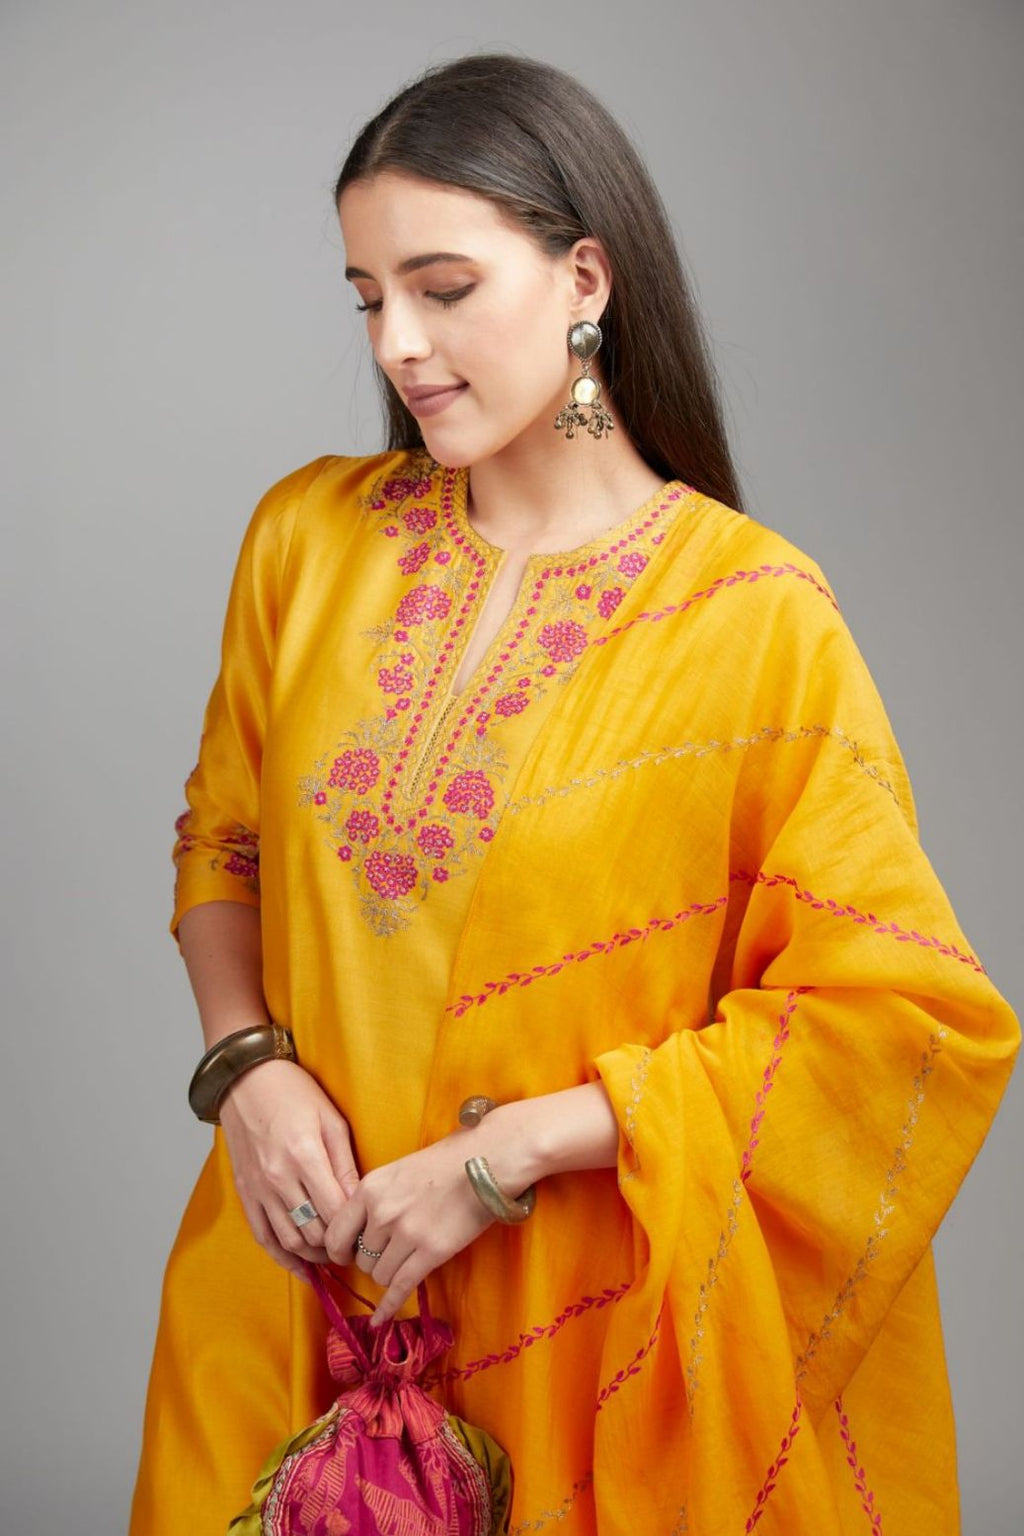 Mango yellow straight kurta set detailed with contrast coloured embroidery at neck and hem